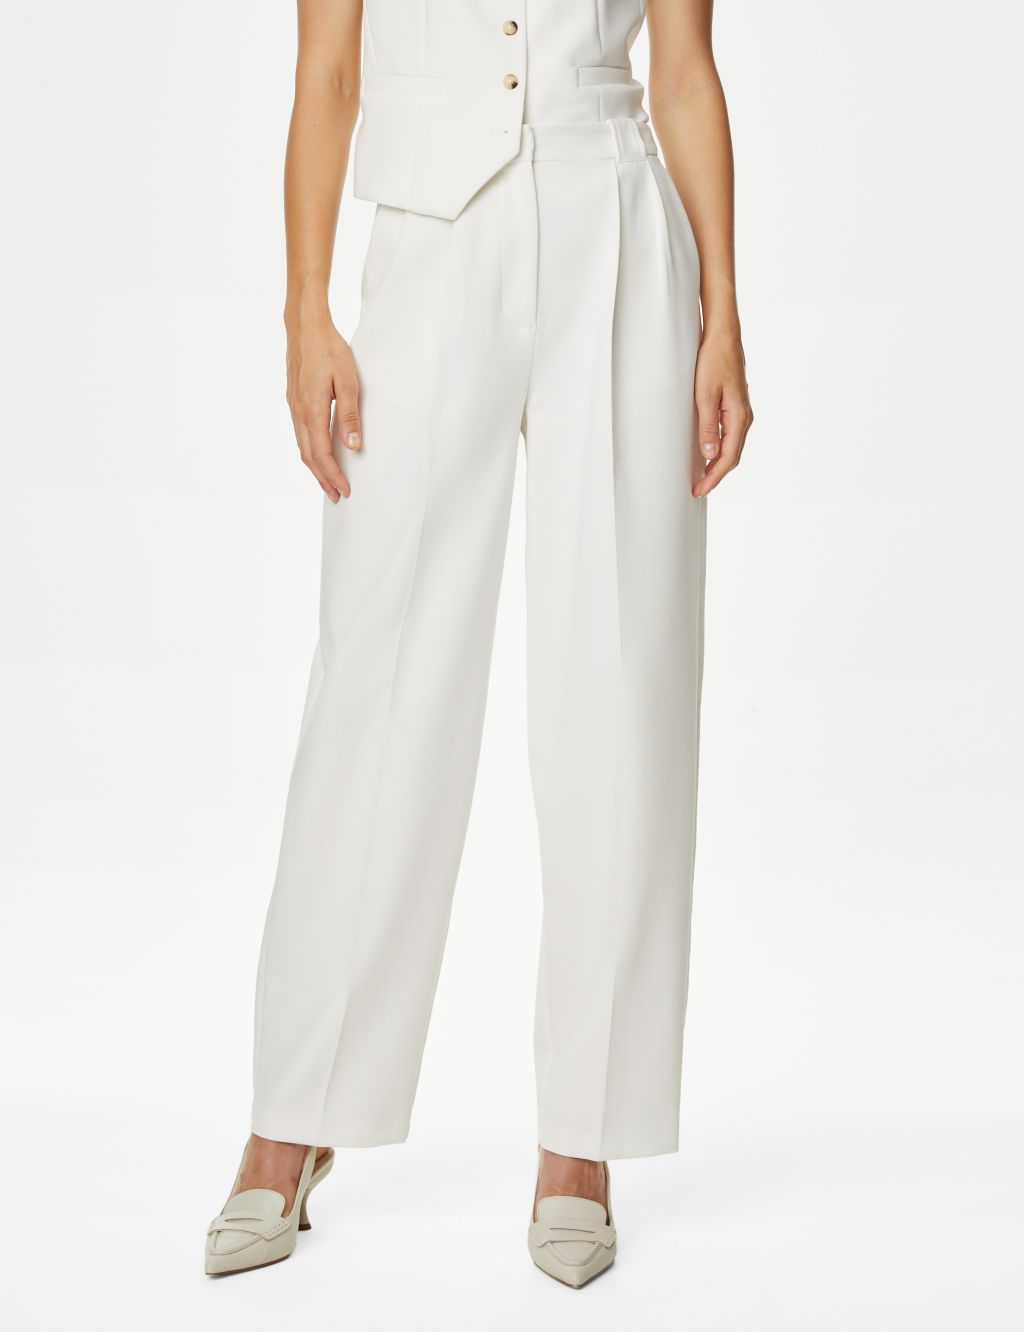 Pleat Front Relaxed Trousers image 7